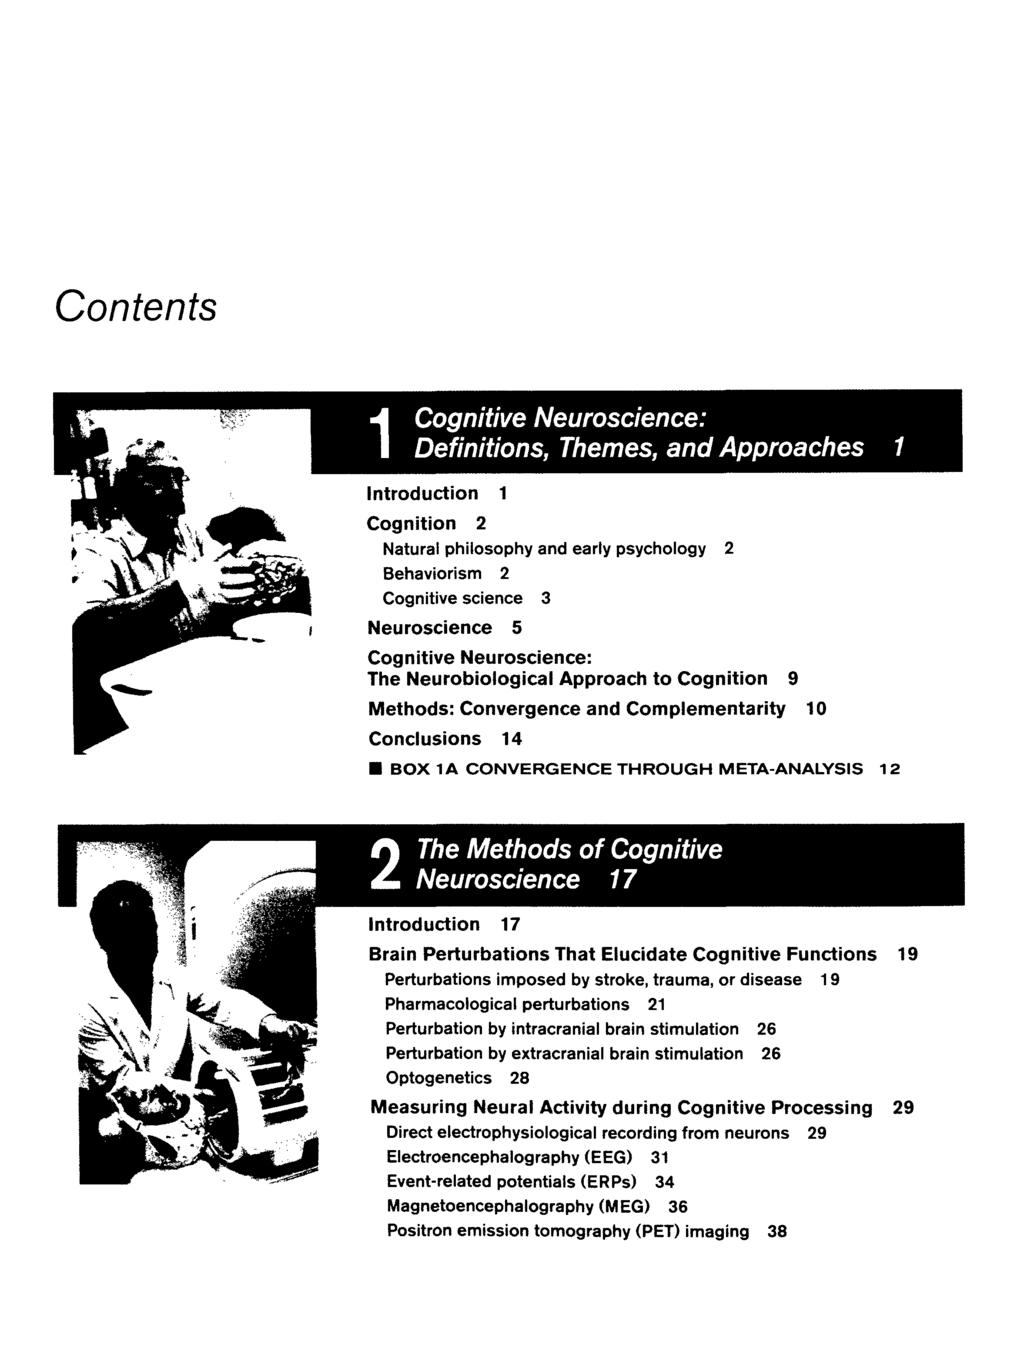 Contents Cognitive Neuroscience: Definitions, and Approaches 1 Introduction 1 Cognition 2 Natural philosophy and early psychology 2 Behaviorism 2 Cognitive science 3 Neuroscience 5 Cognitive